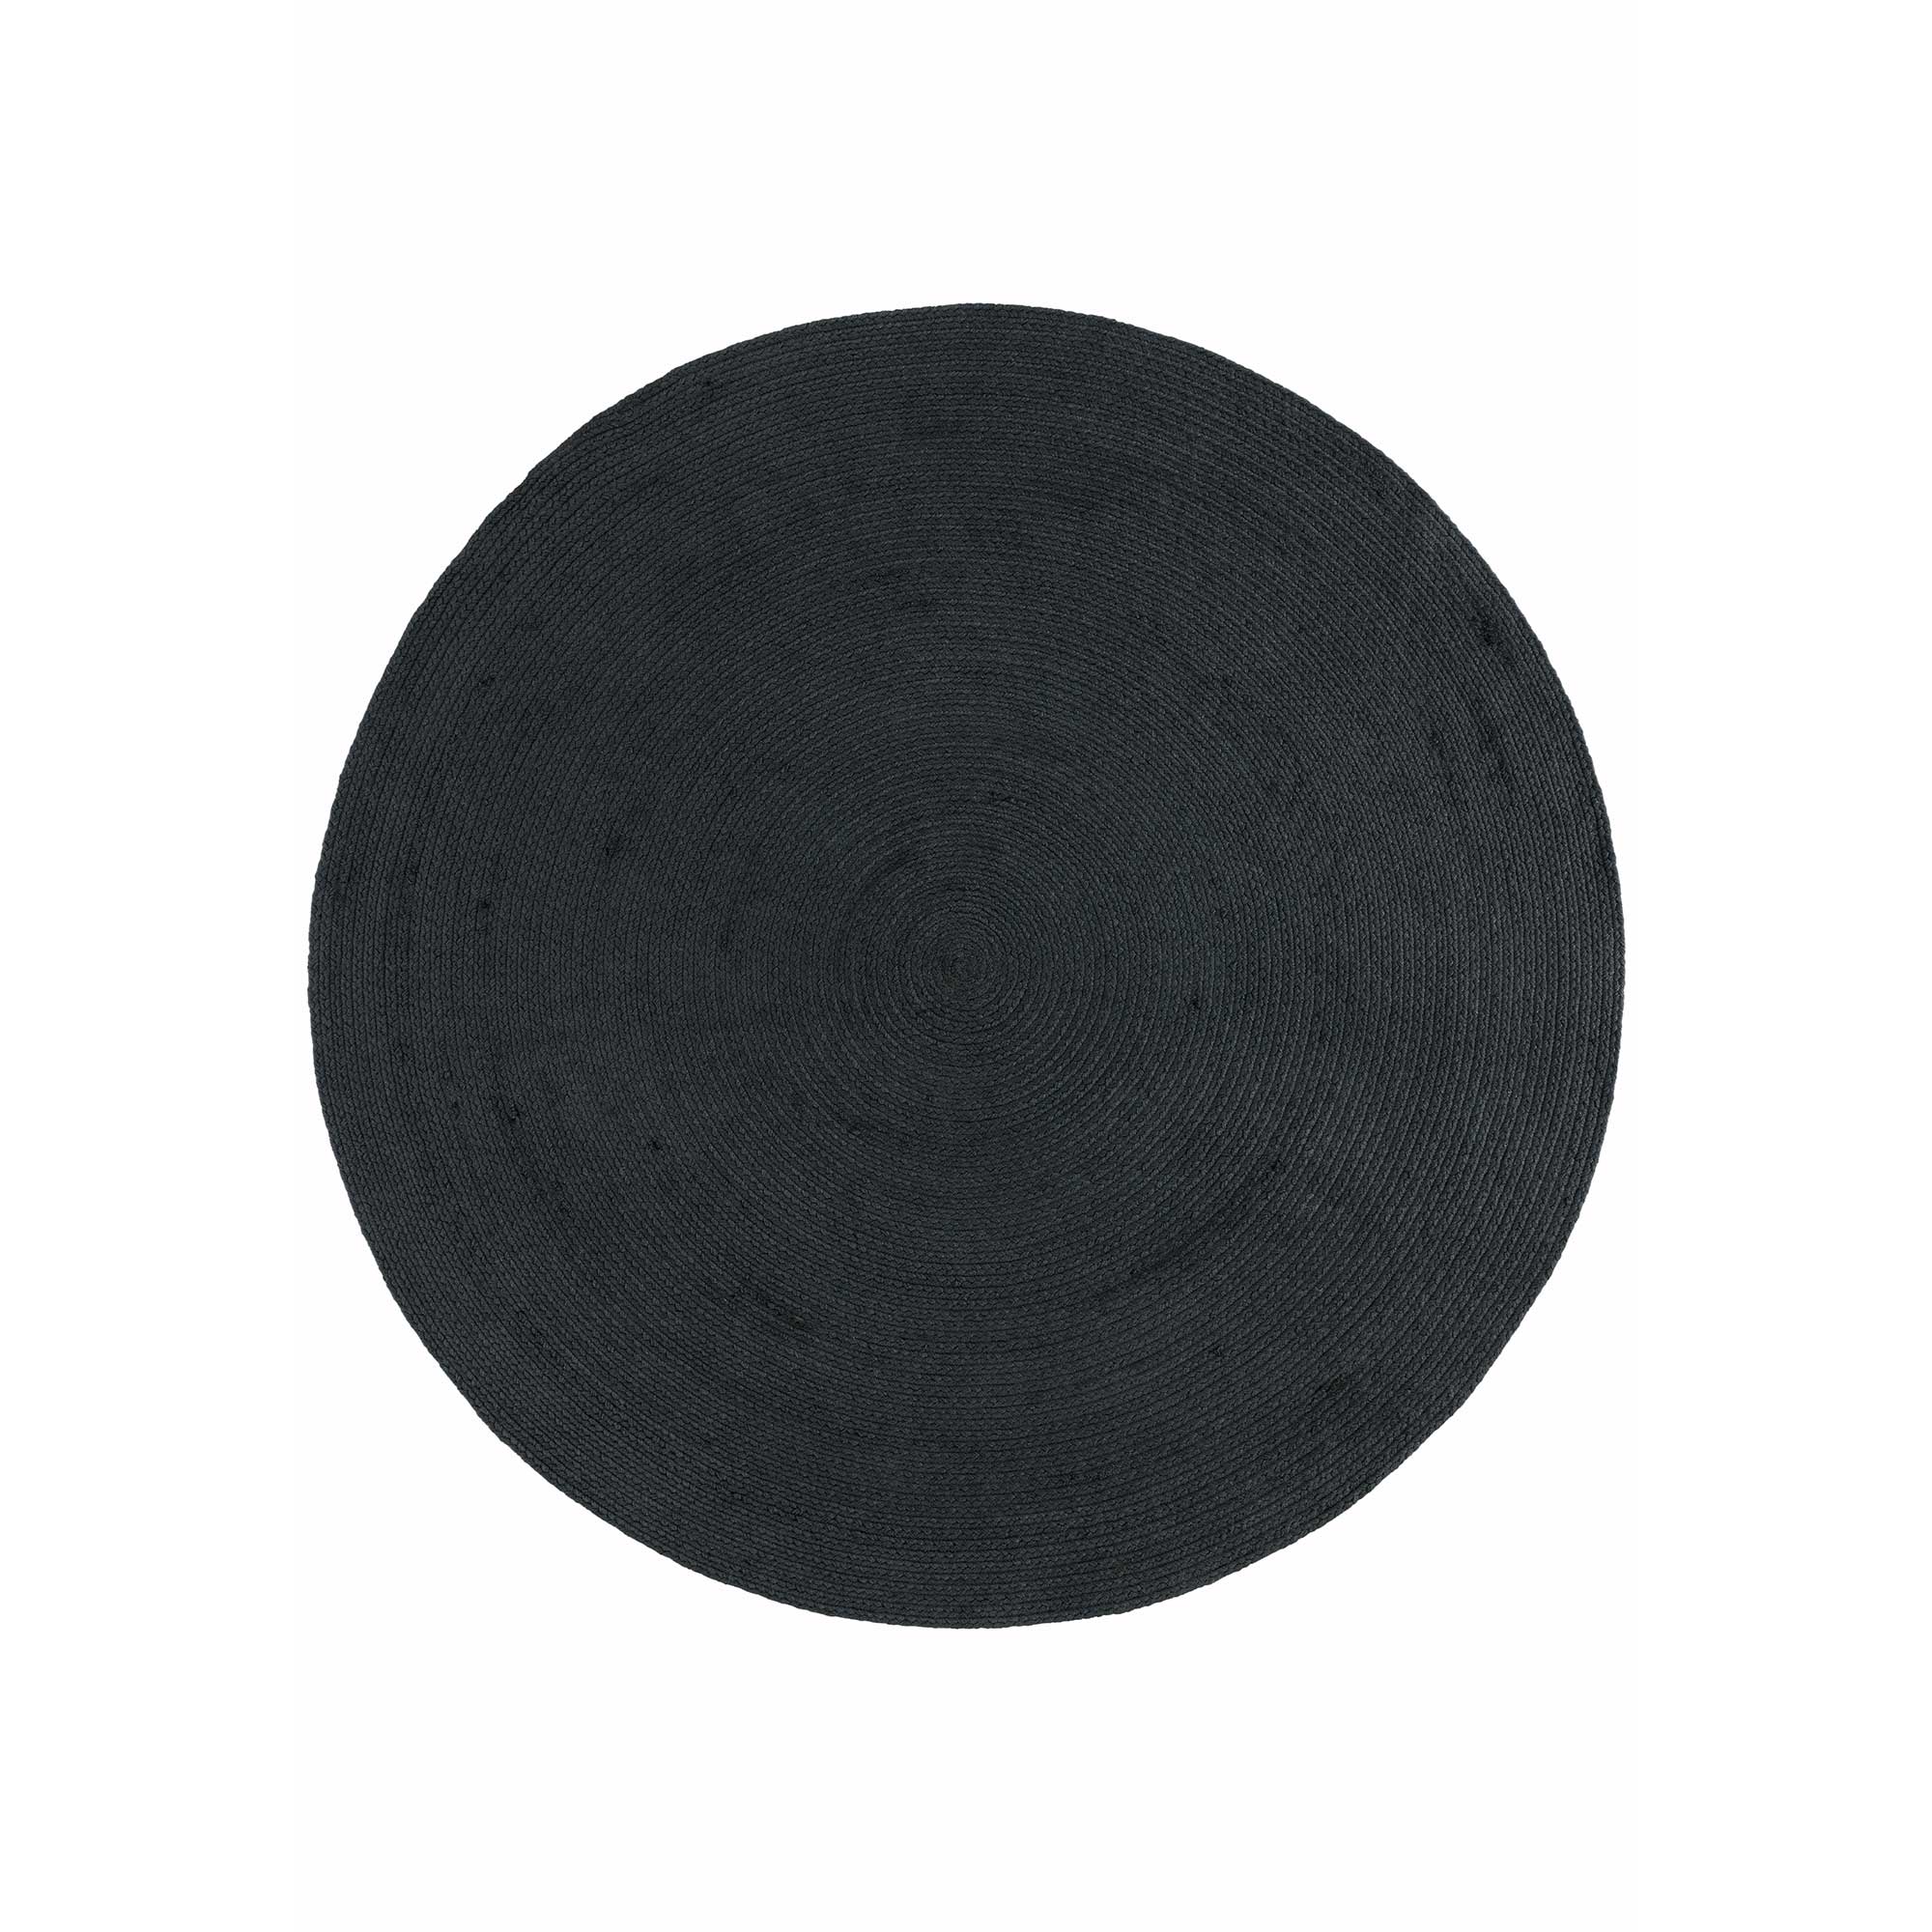 Lyle 200Cm Circular Rug Charcoal, Round, Black Polyester | Barker & Stonehouse